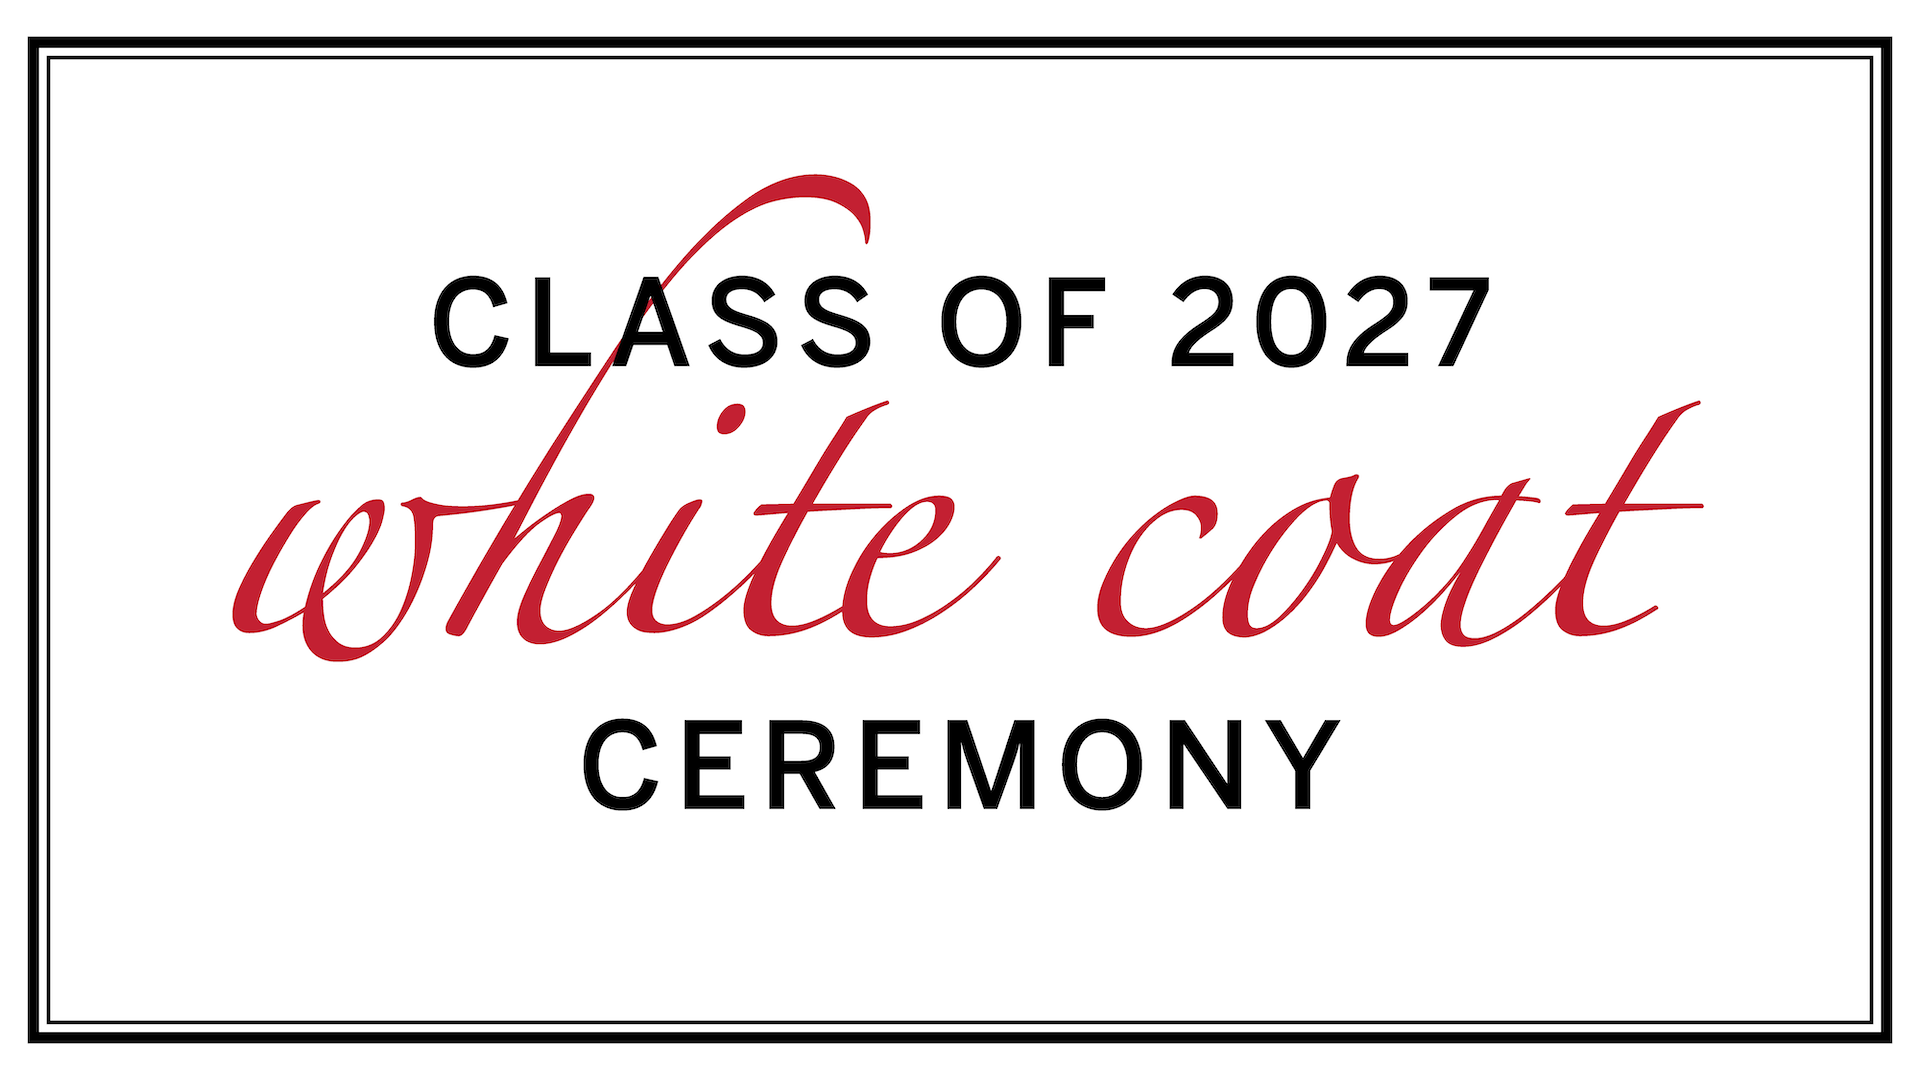 Title card reading "Class of 2027: White Coat Ceremony"